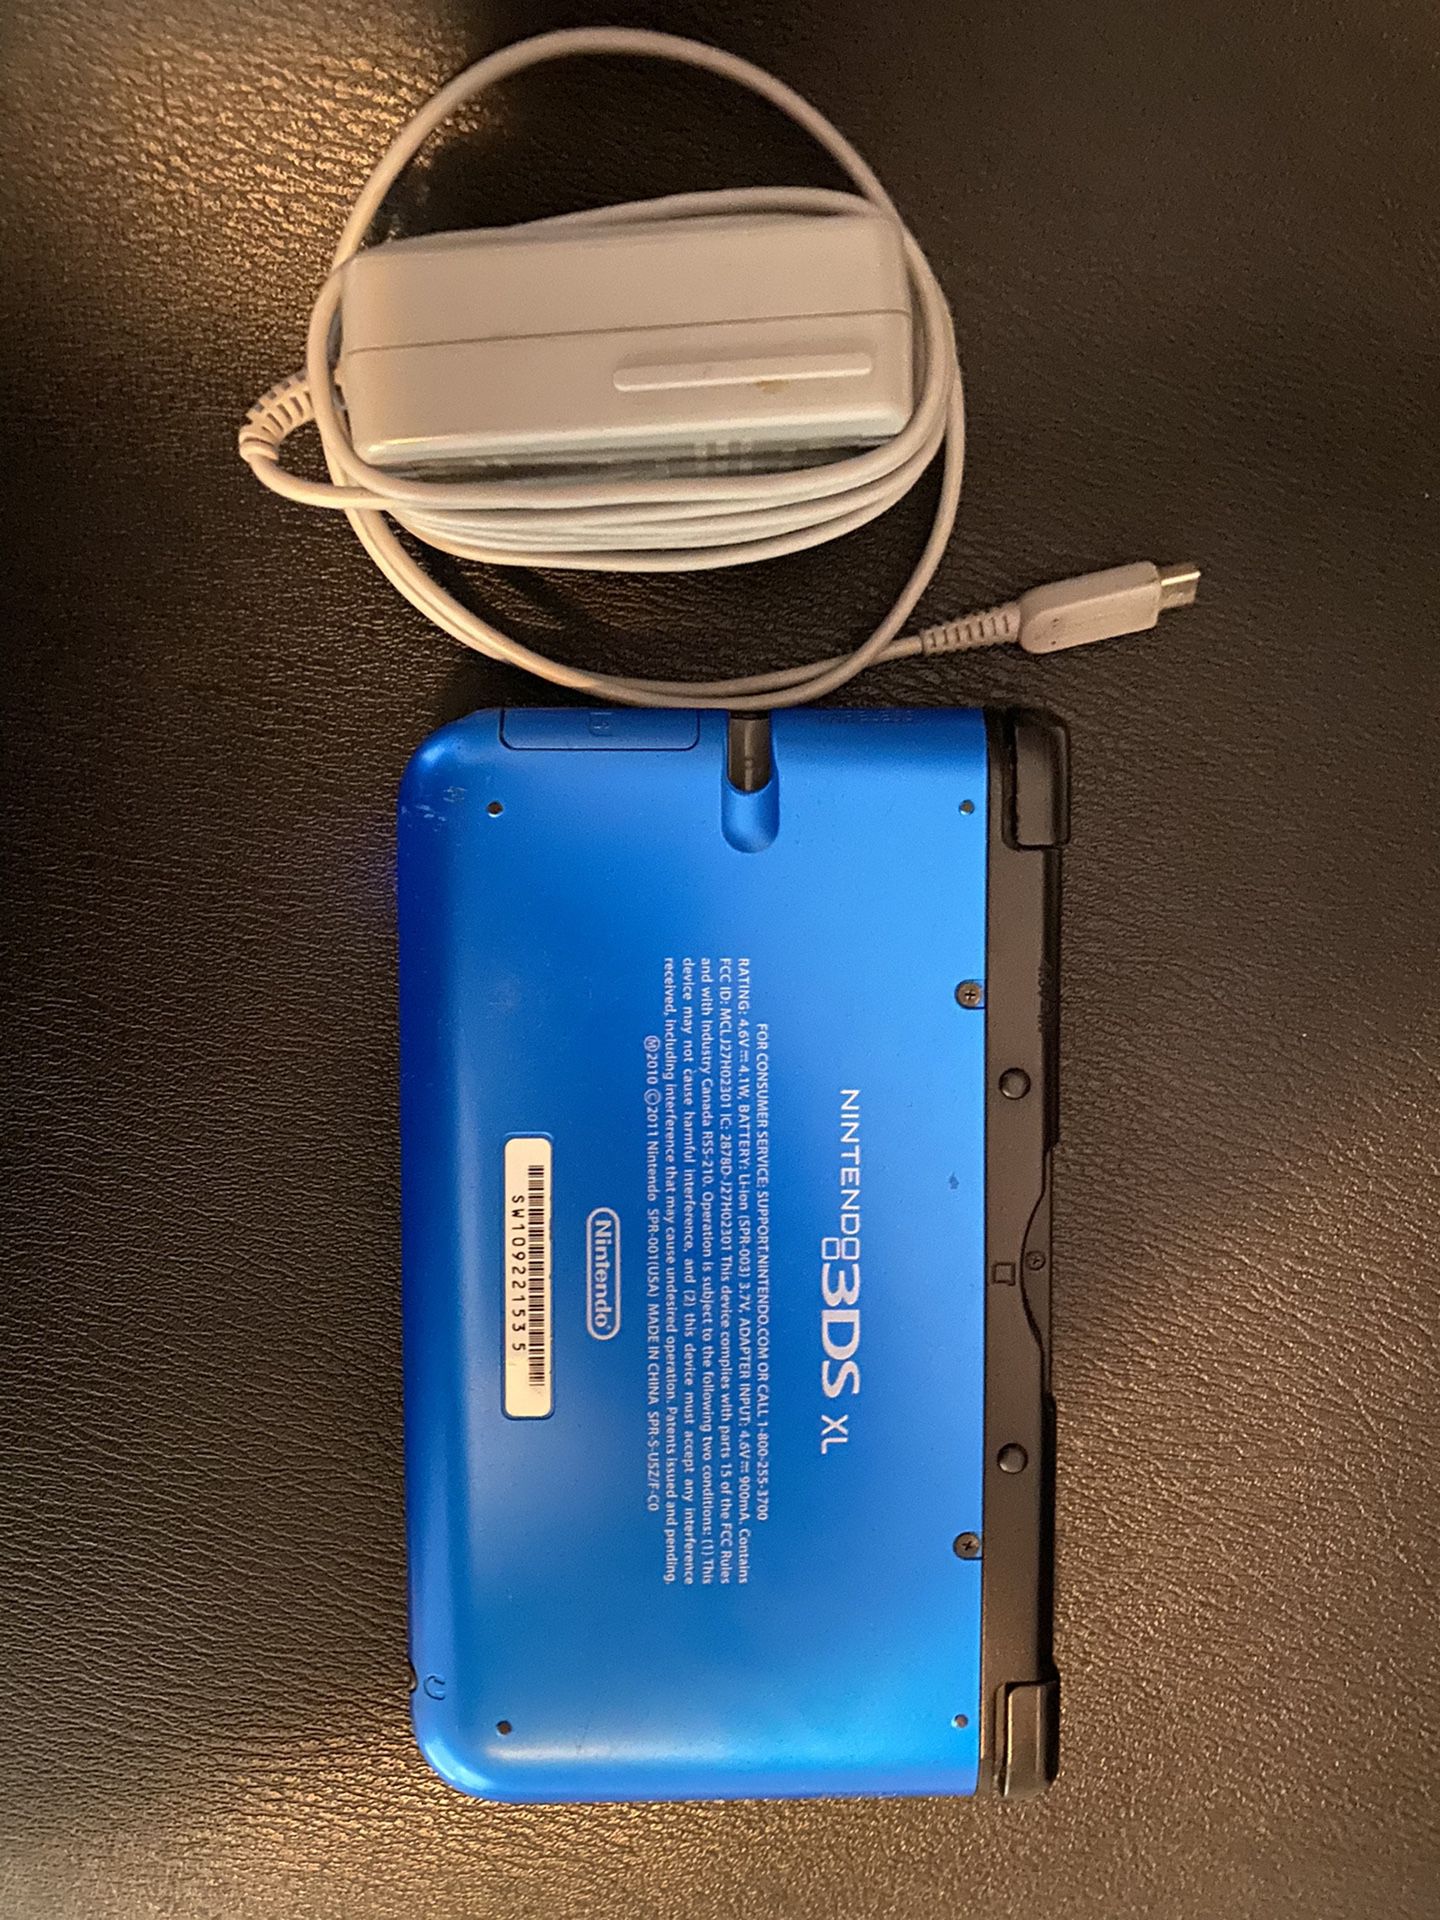 Used Nintendo 3DS XL